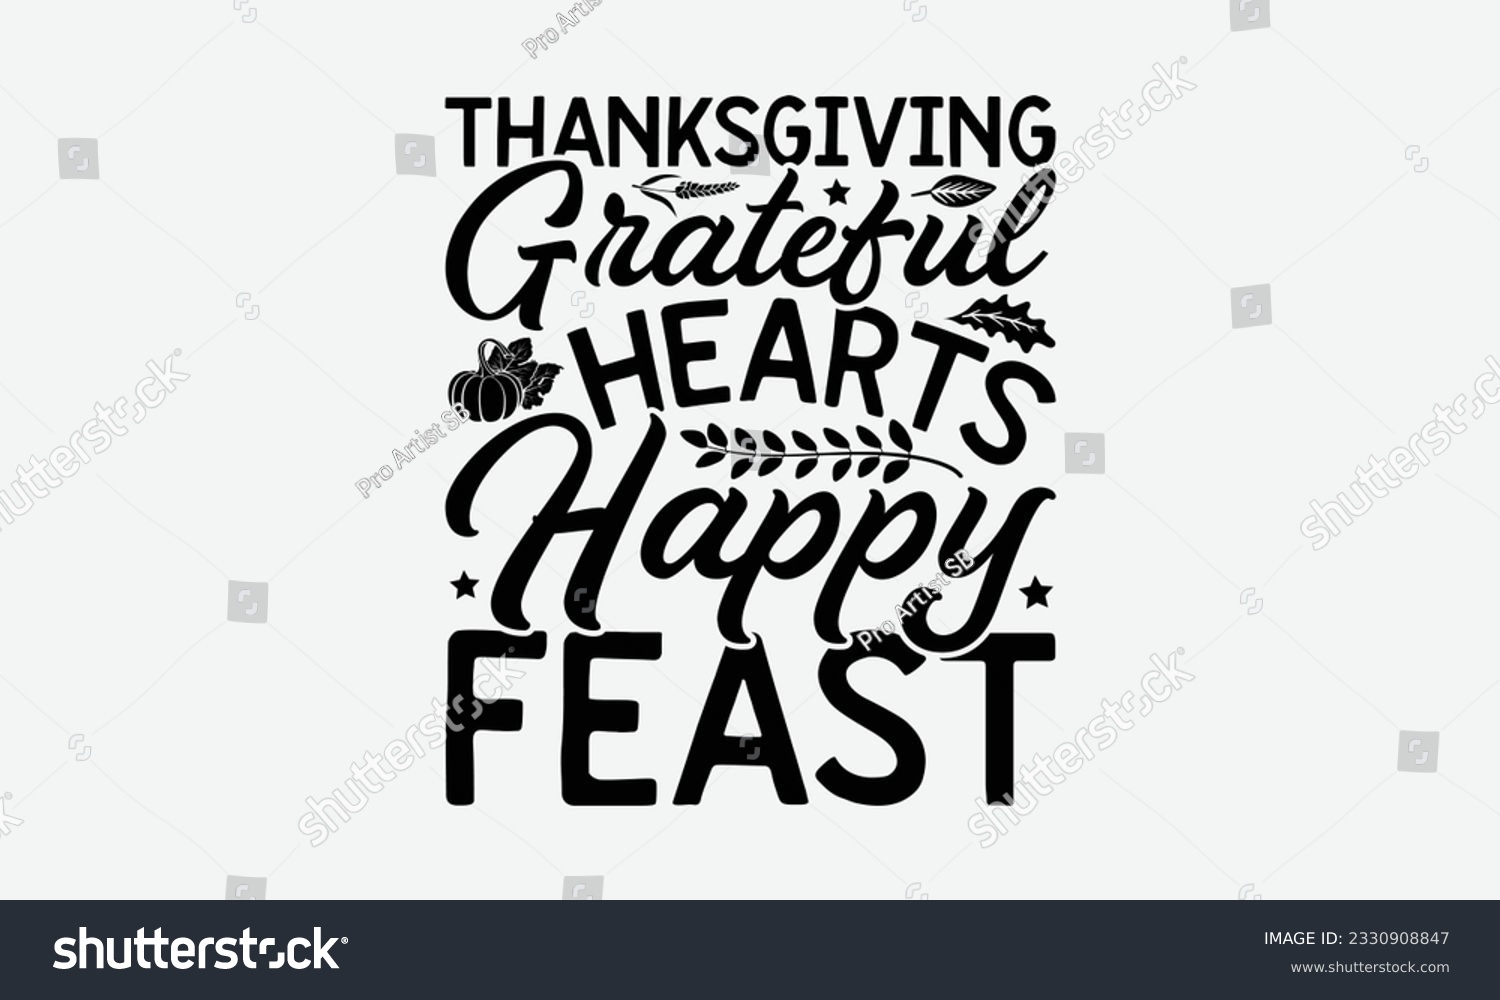 SVG of Thanksgiving Grateful Hearts Happy Feast - Thanksgiving T-shirt Design Template, Thanksgiving Quotes File, Hand Drawn Lettering Phrase, SVG Files for Cutting Cricut and Silhouette. svg